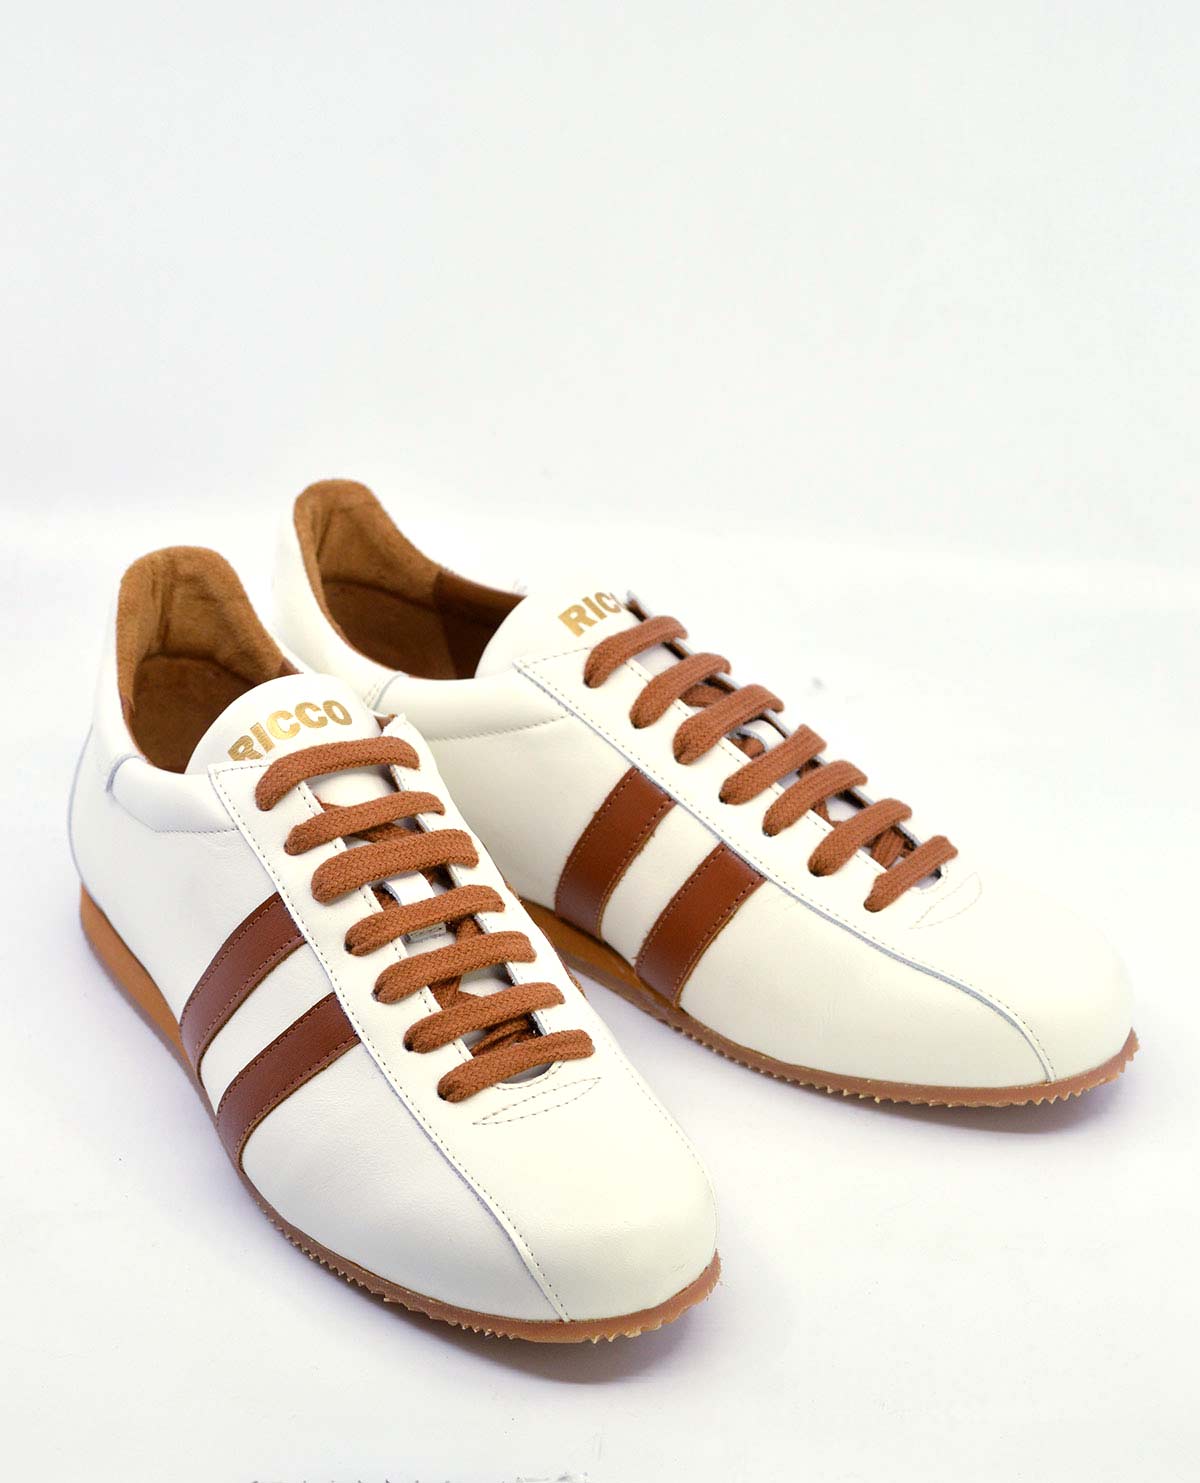 The “Ricco” In Cream & Pecan Stripe – Old School Trainers – Mod Shoes